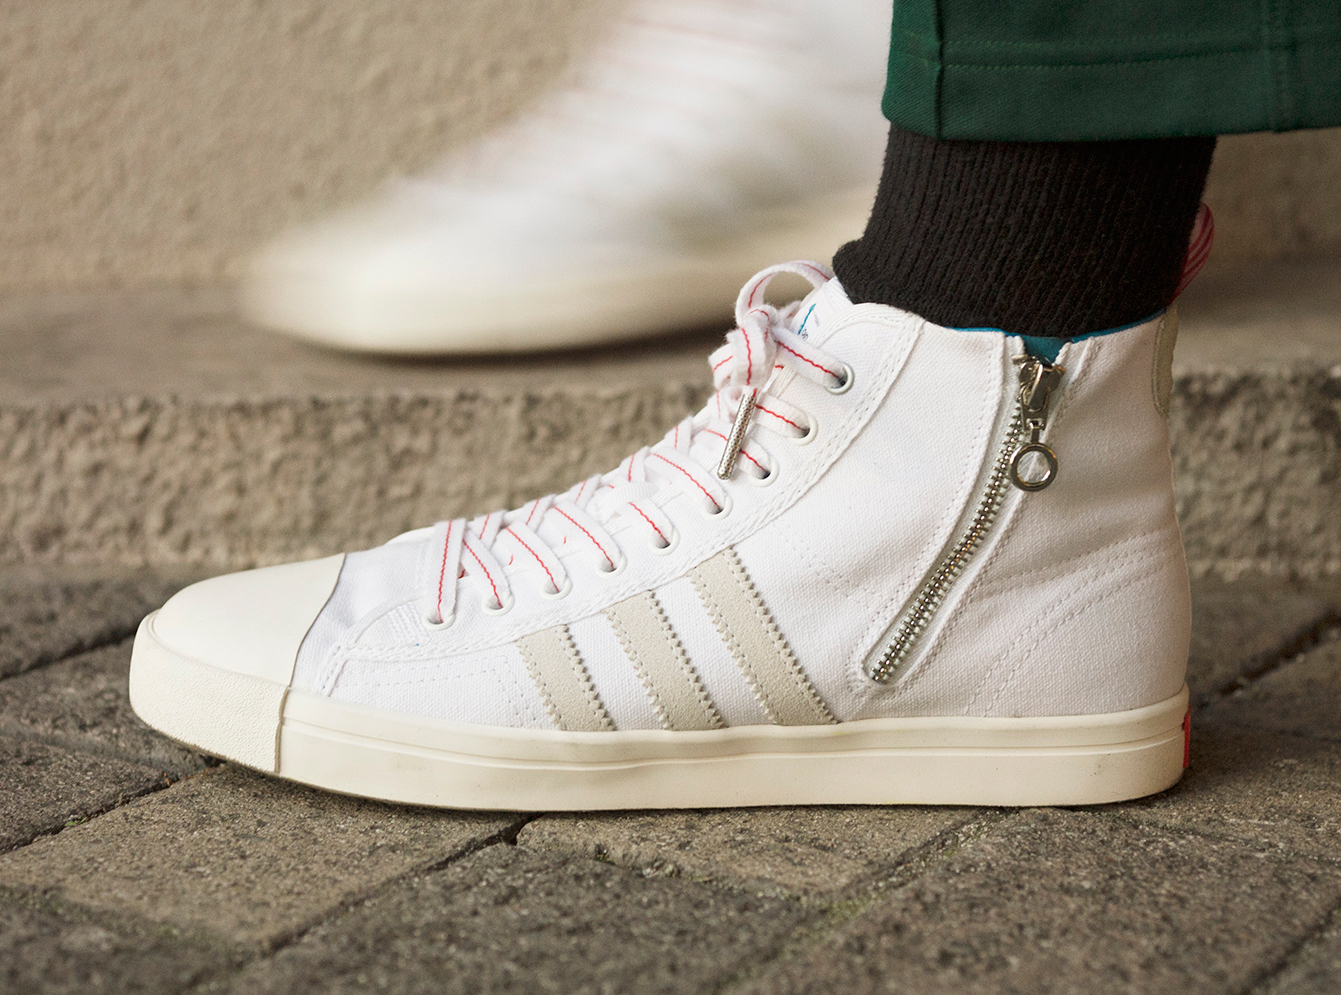 Bedwin & The Heartbreakers x adidas Originals - Spring/Summer 2014 Collection